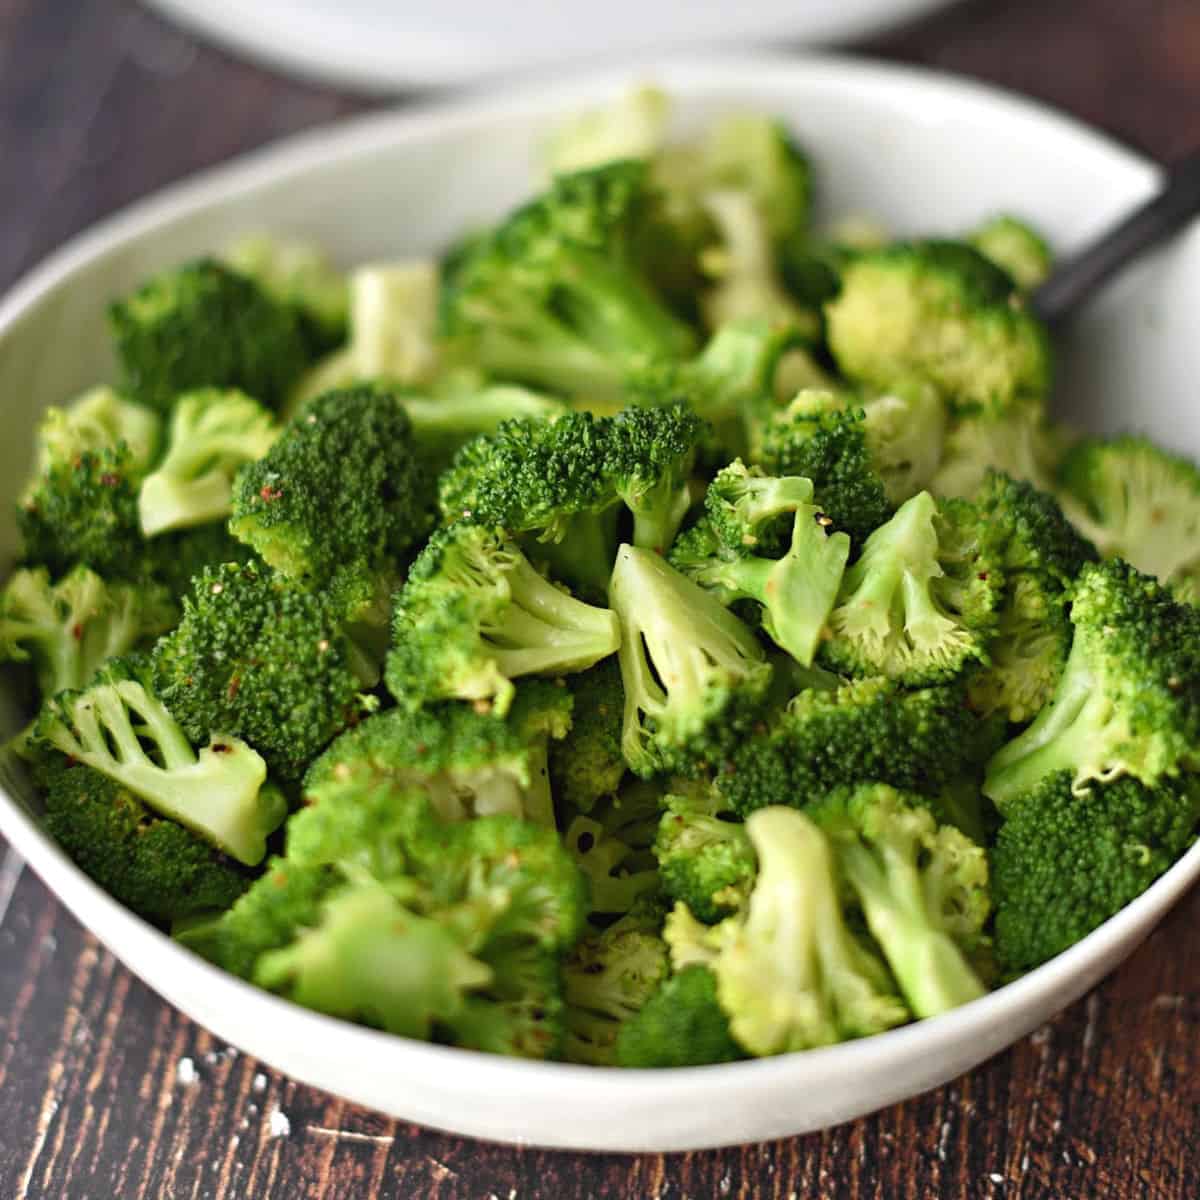 steamed broccoli in a large white bowl.